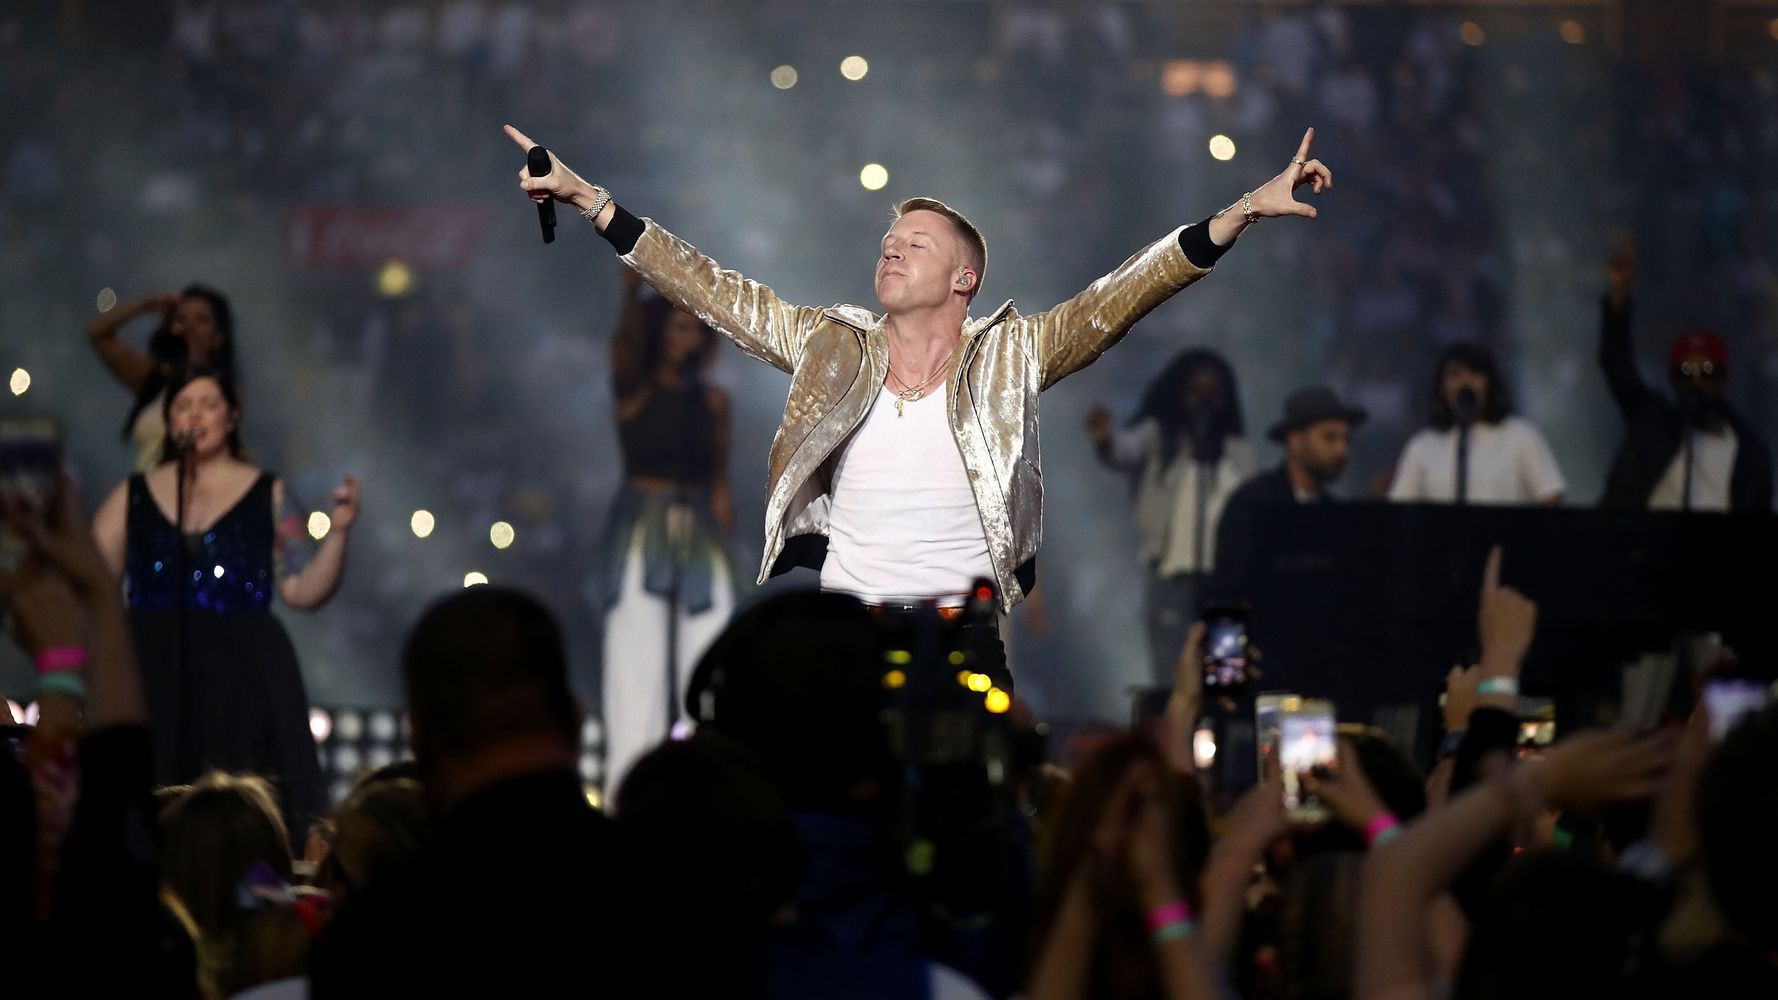 Macklemore Performs 'Same Love' At NRL Grand Final, And It was Glorious